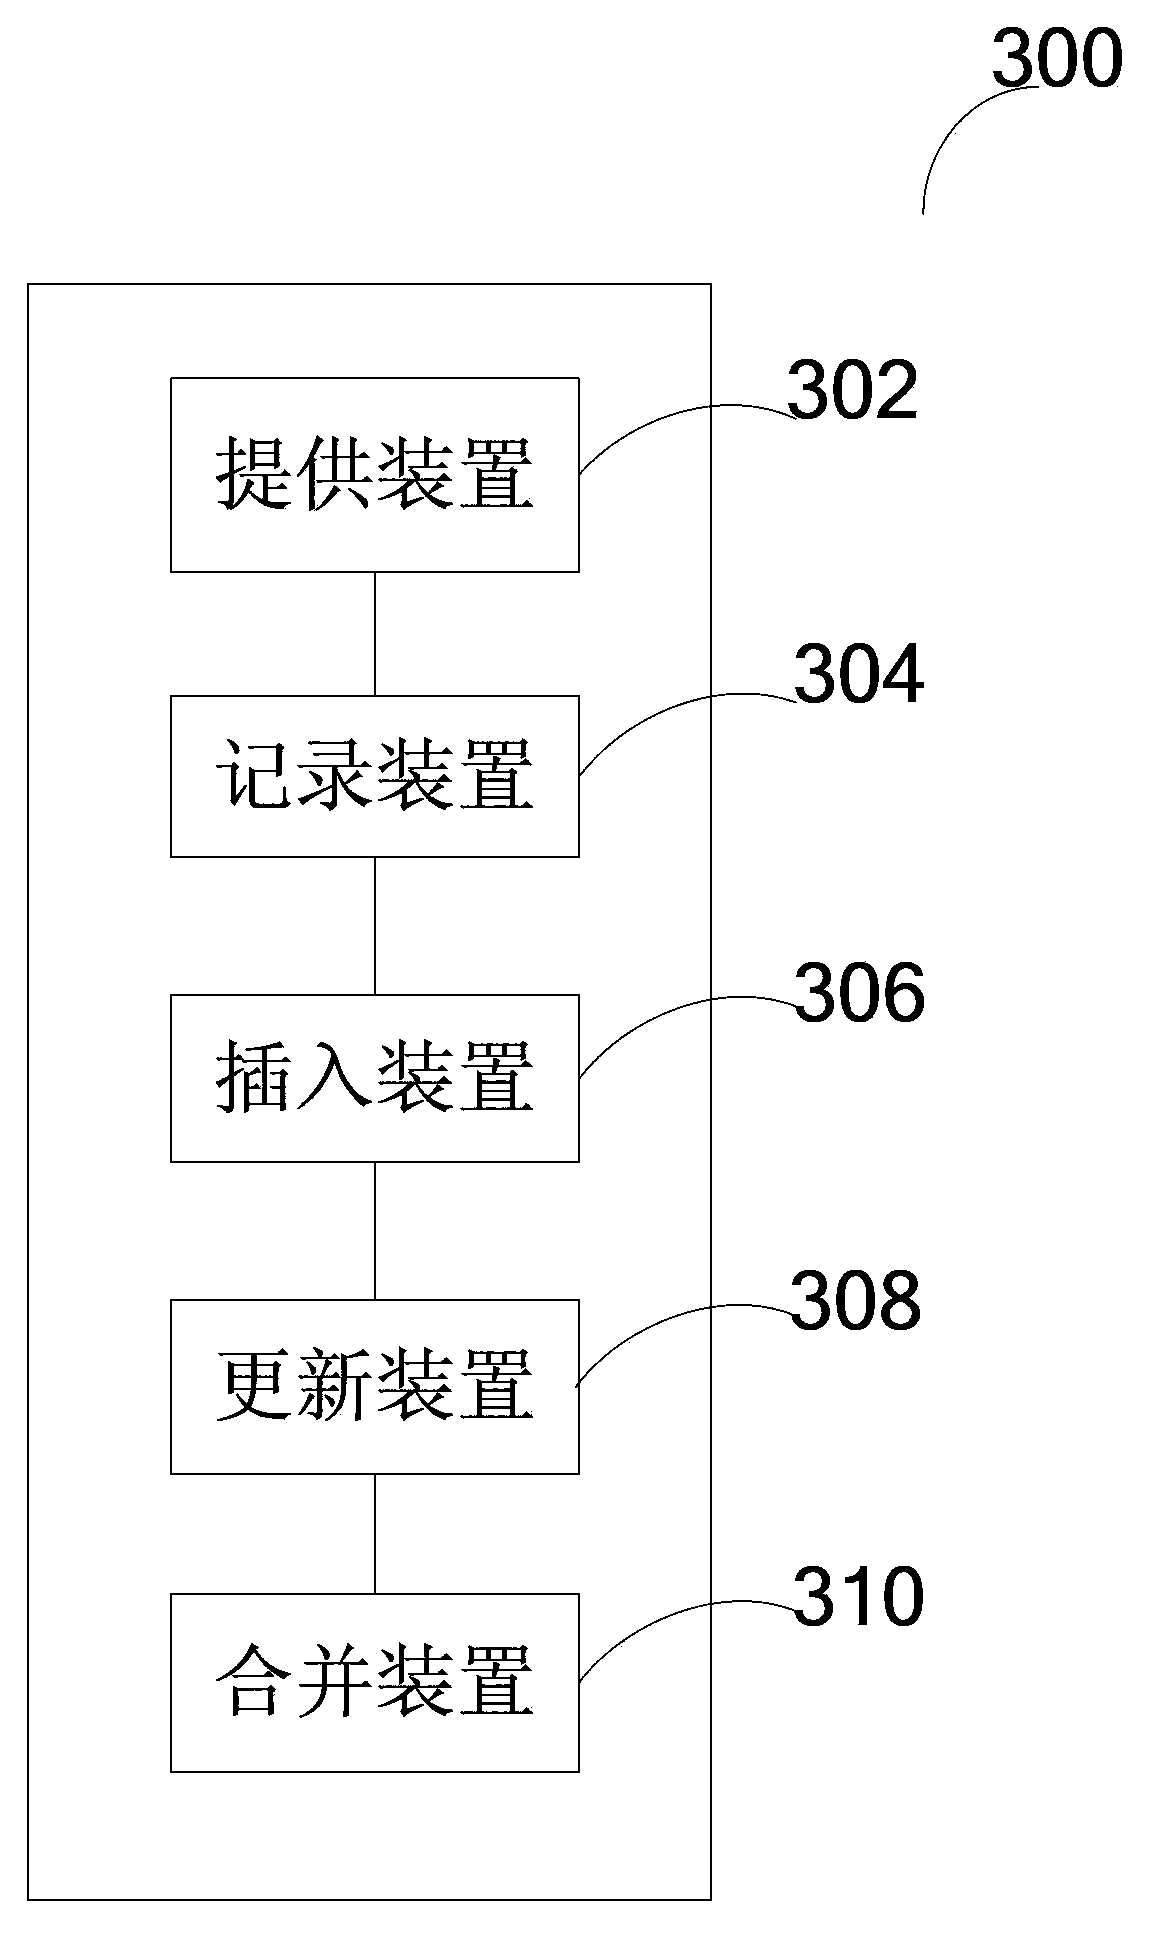 Method and equipment for managing database in multi-tenant system